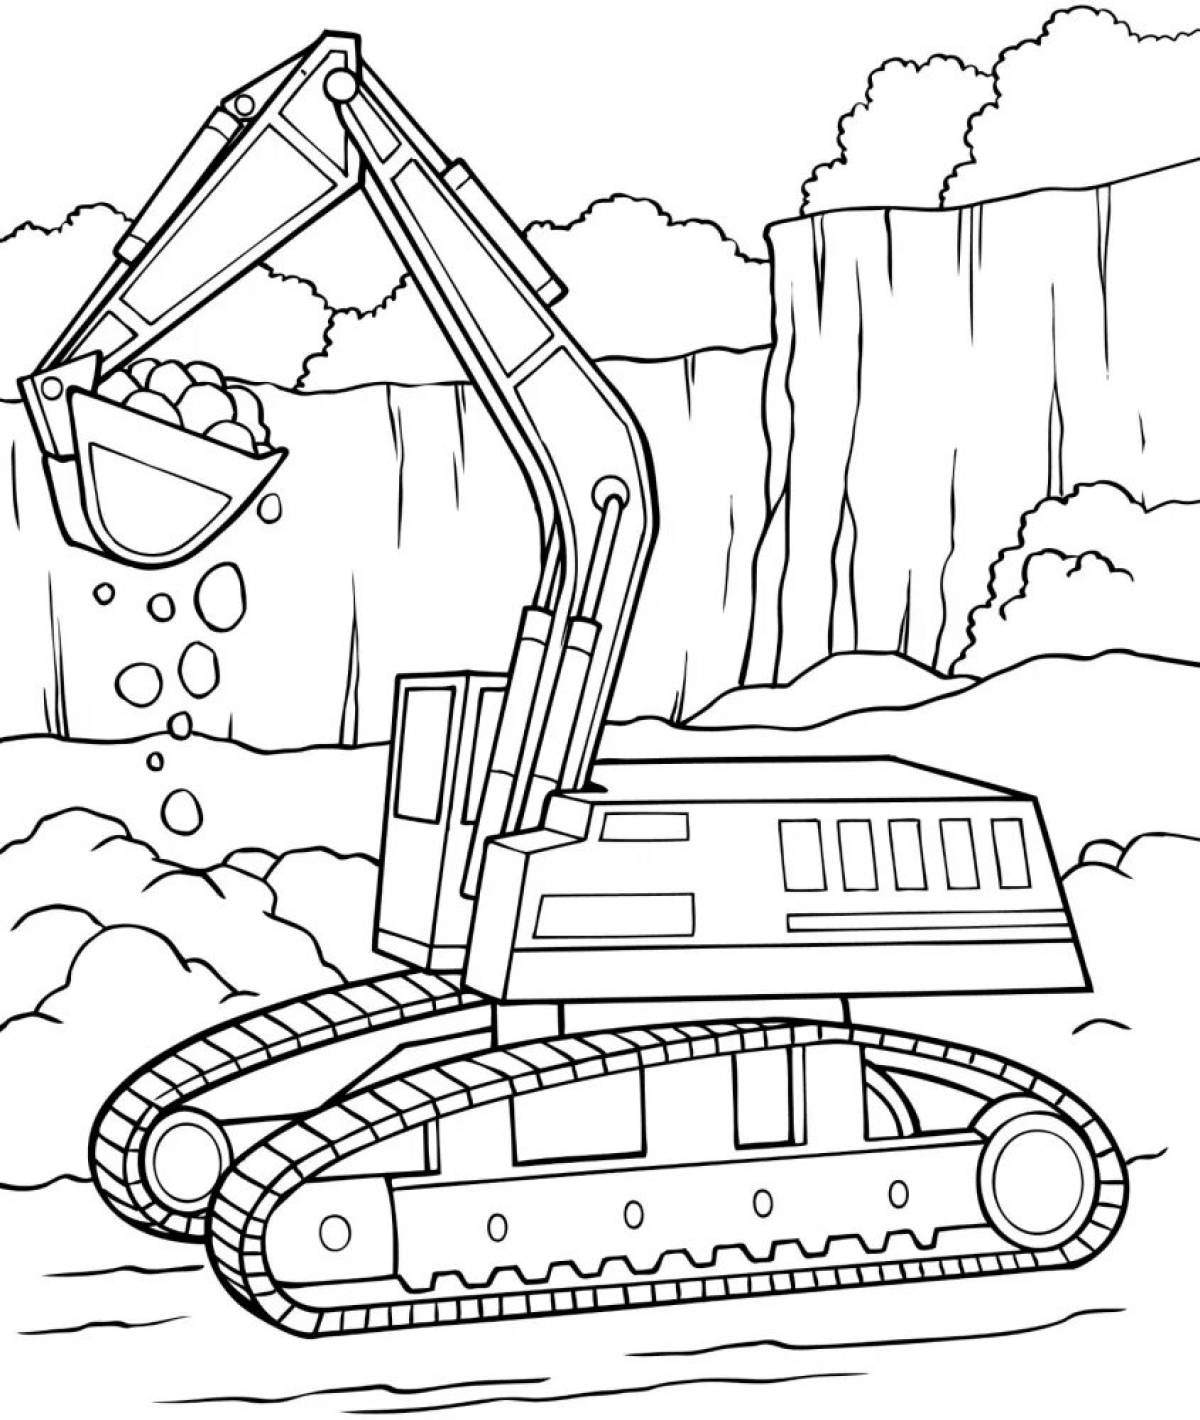 Unusual excavator coloring book for 4-5 year olds